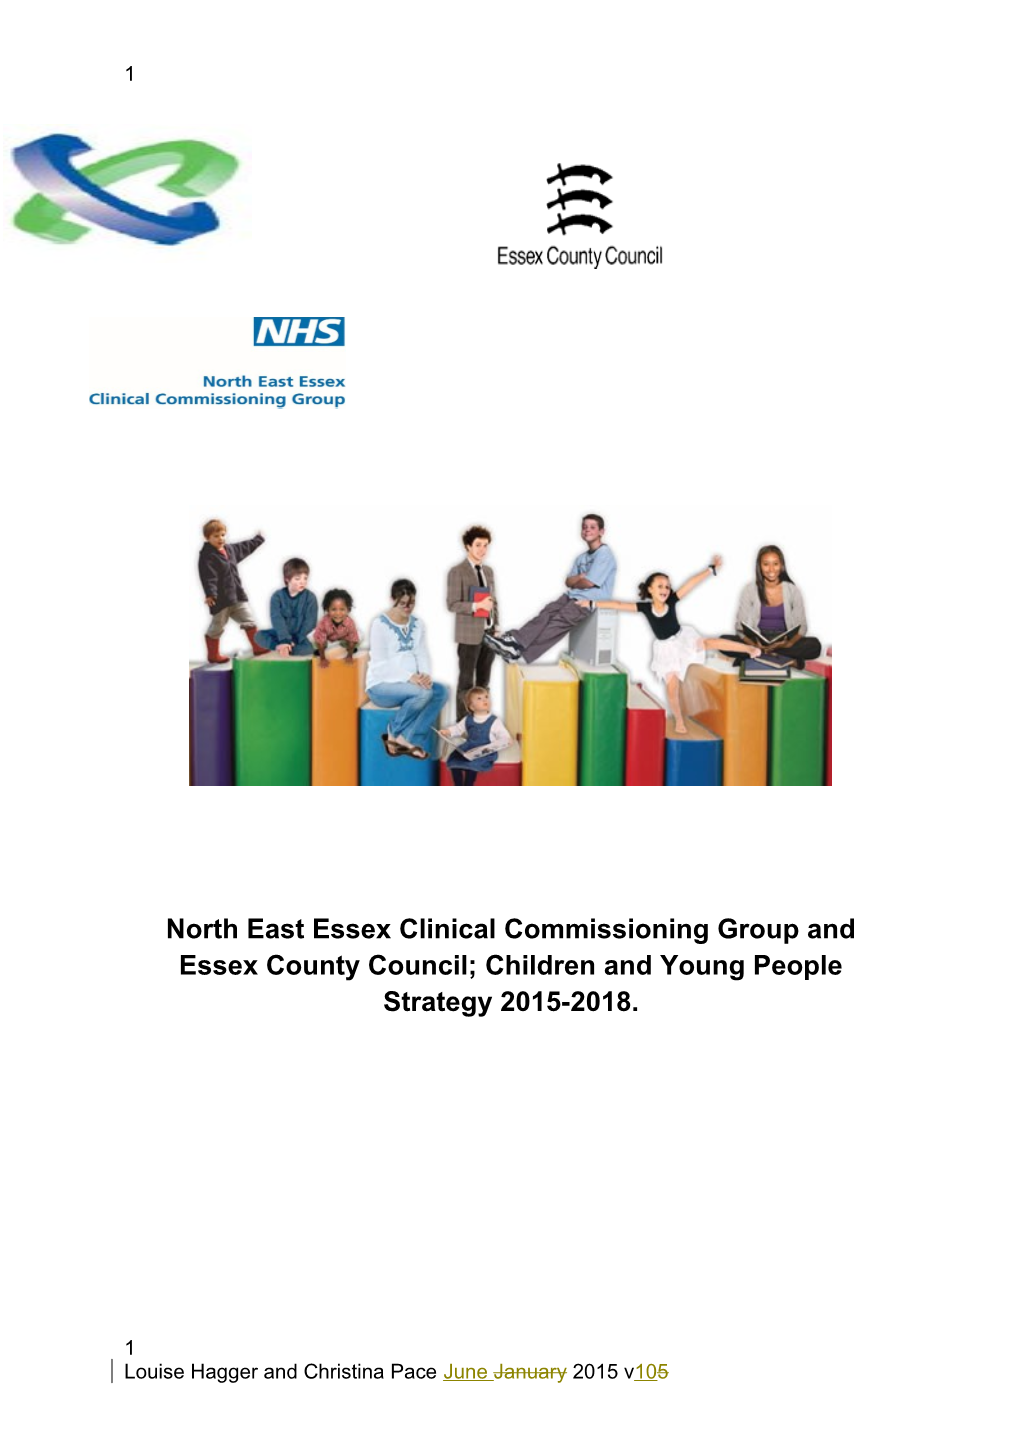 North East Essex Clinical Commissioning Group and Essex County Council;Children and Young